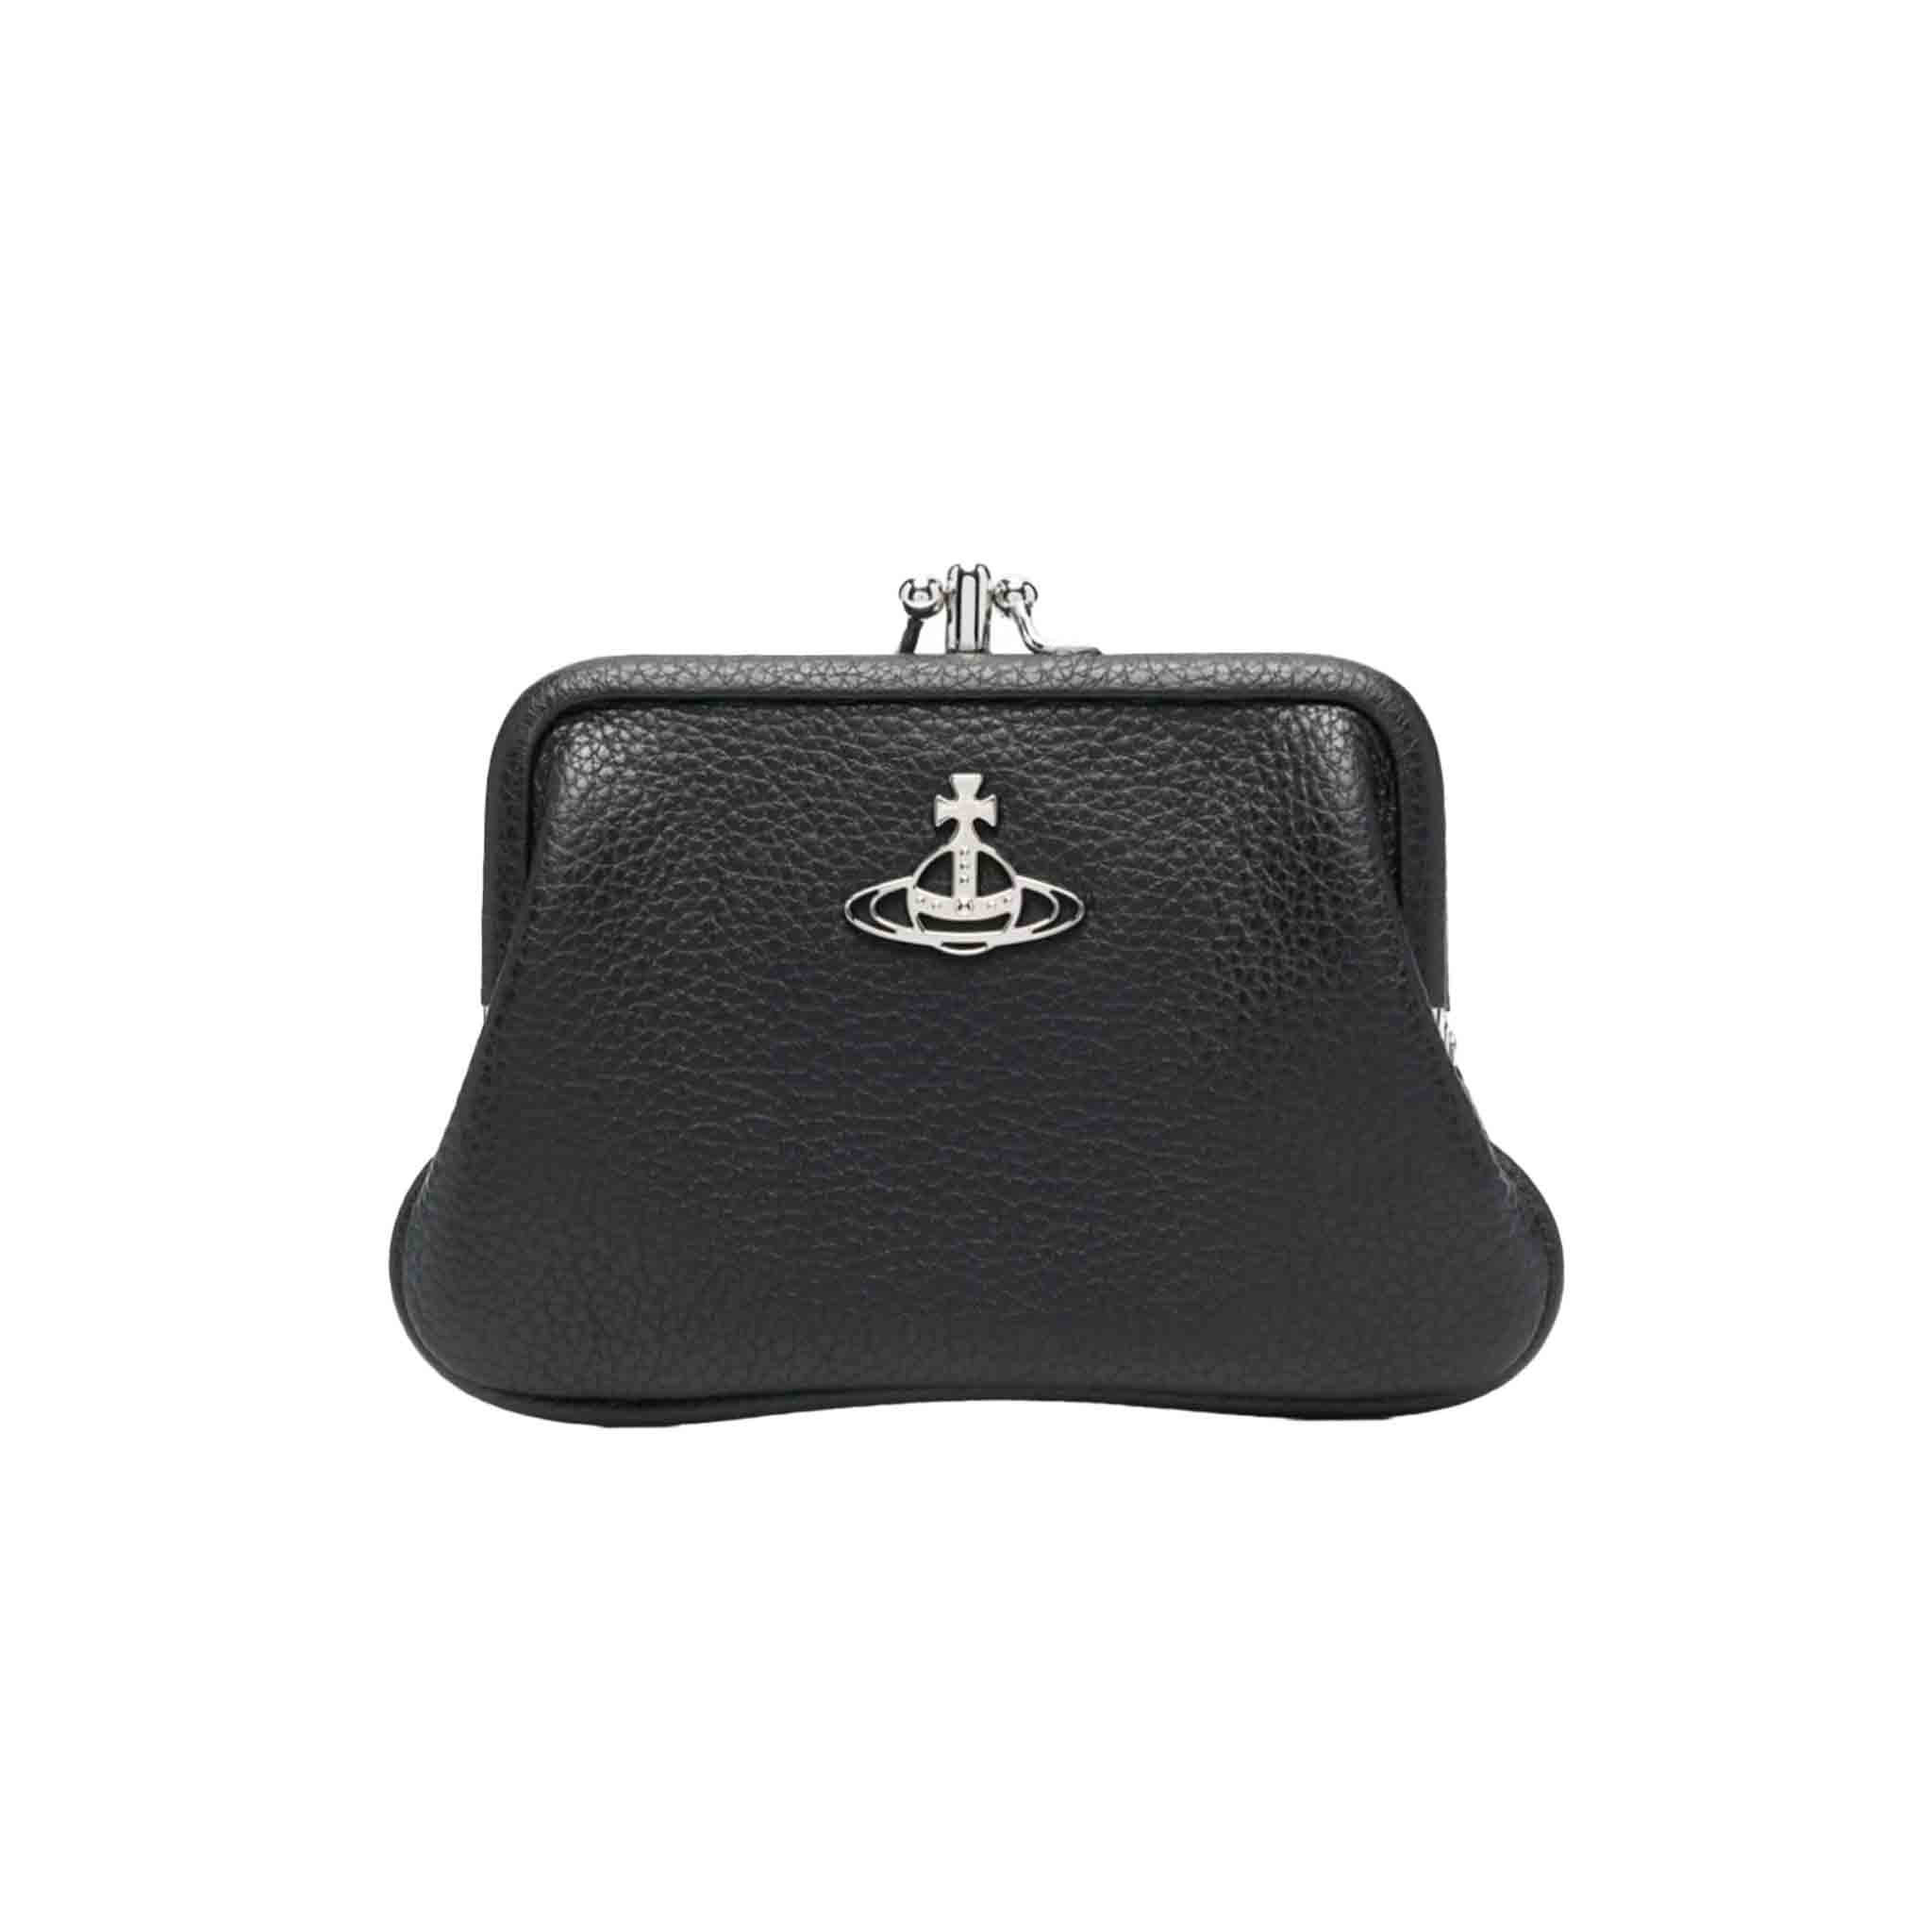 Vivienne Westwood Grained Leather Mini Frame Coin Purse in Black